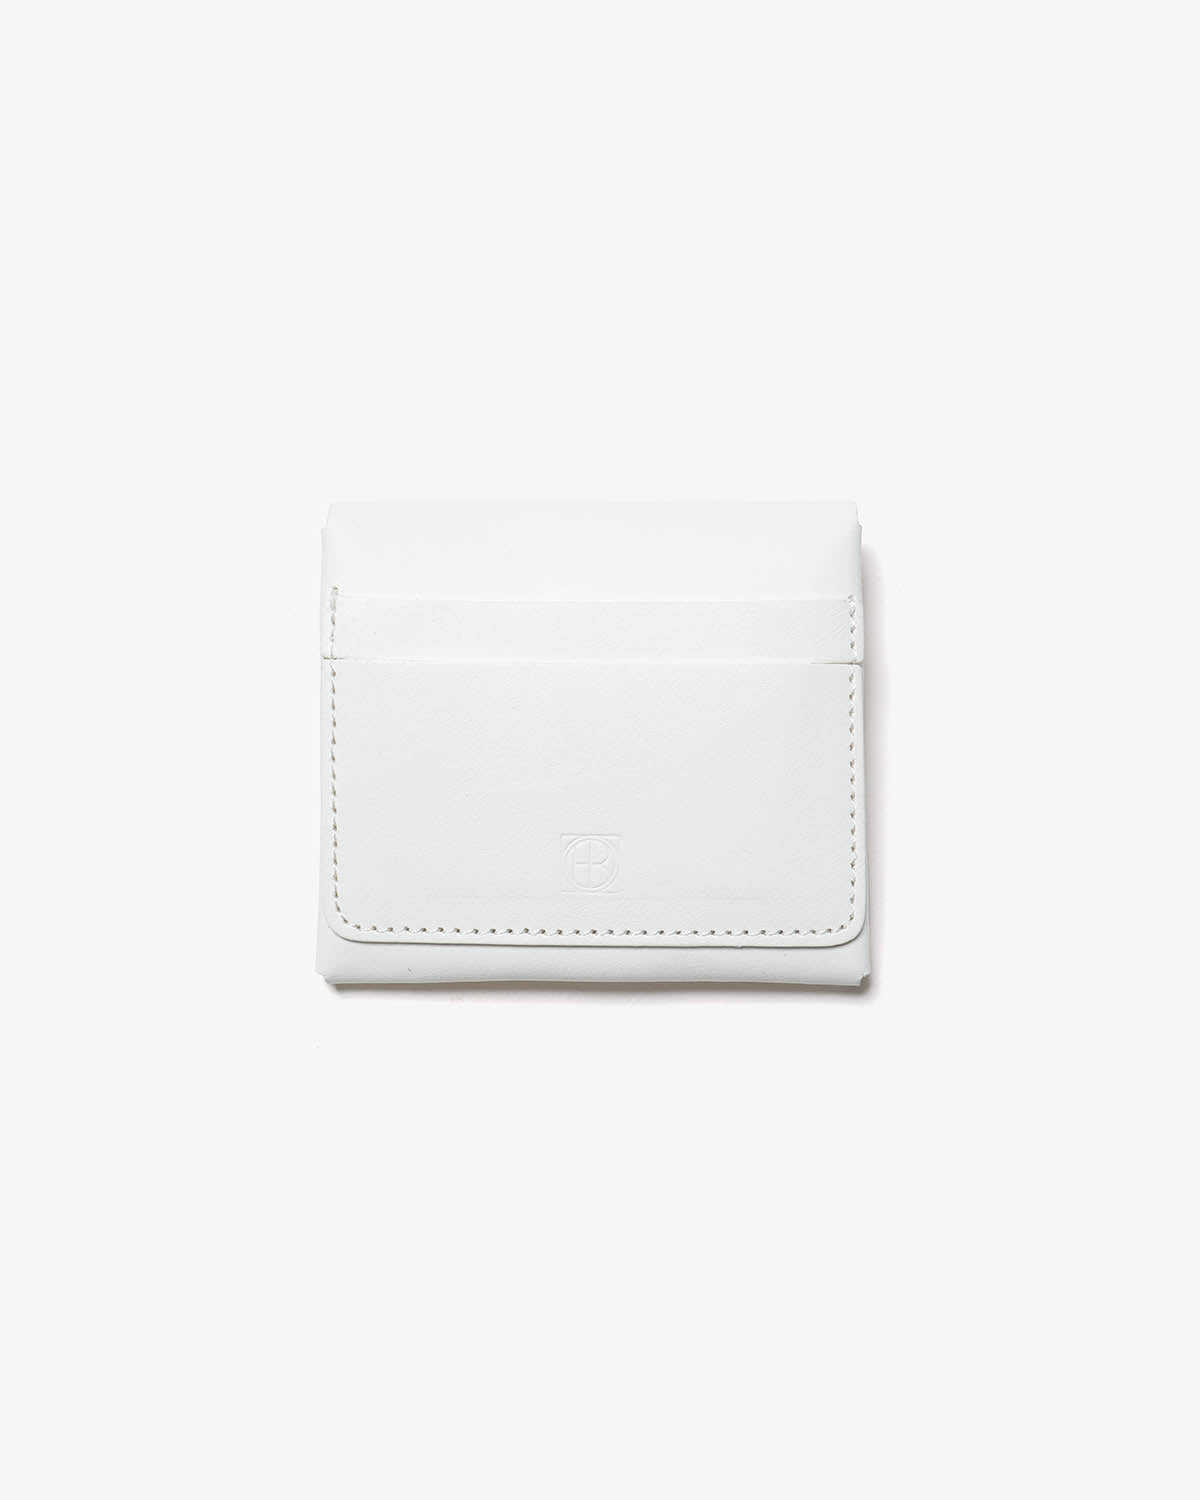 COMPACT WALLET COW LEATHER